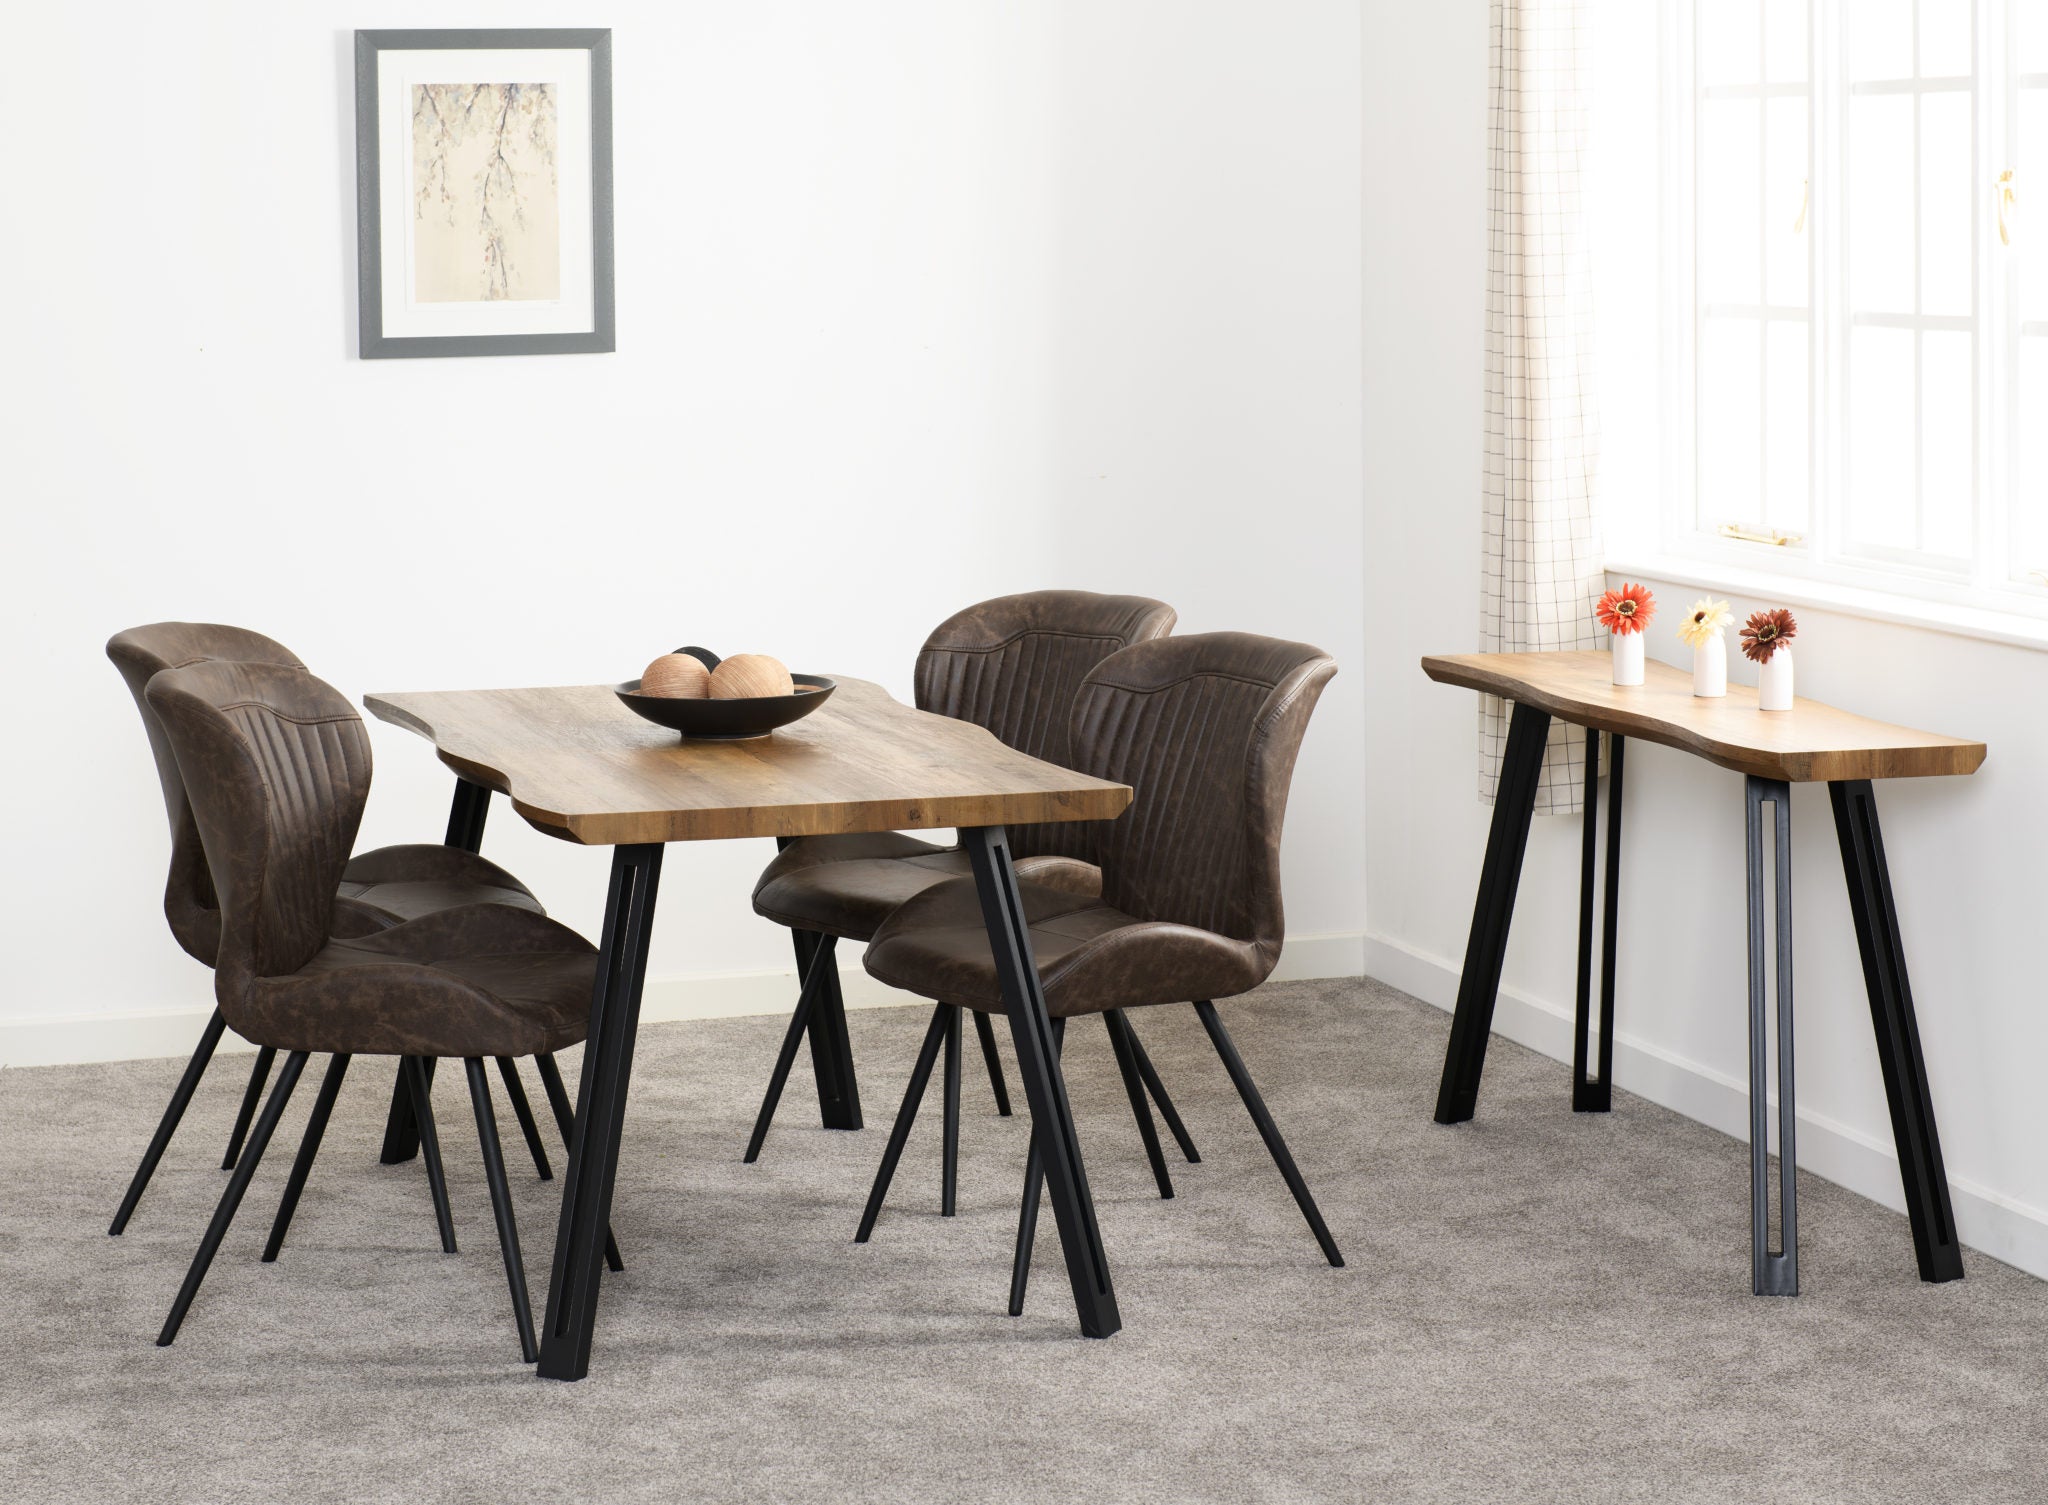 QUEBEC-DINING-TABLE-WAVE-EDGE-DINING-CHAIR-2020-400-403-048-400-402-103-01-scaled.jpg